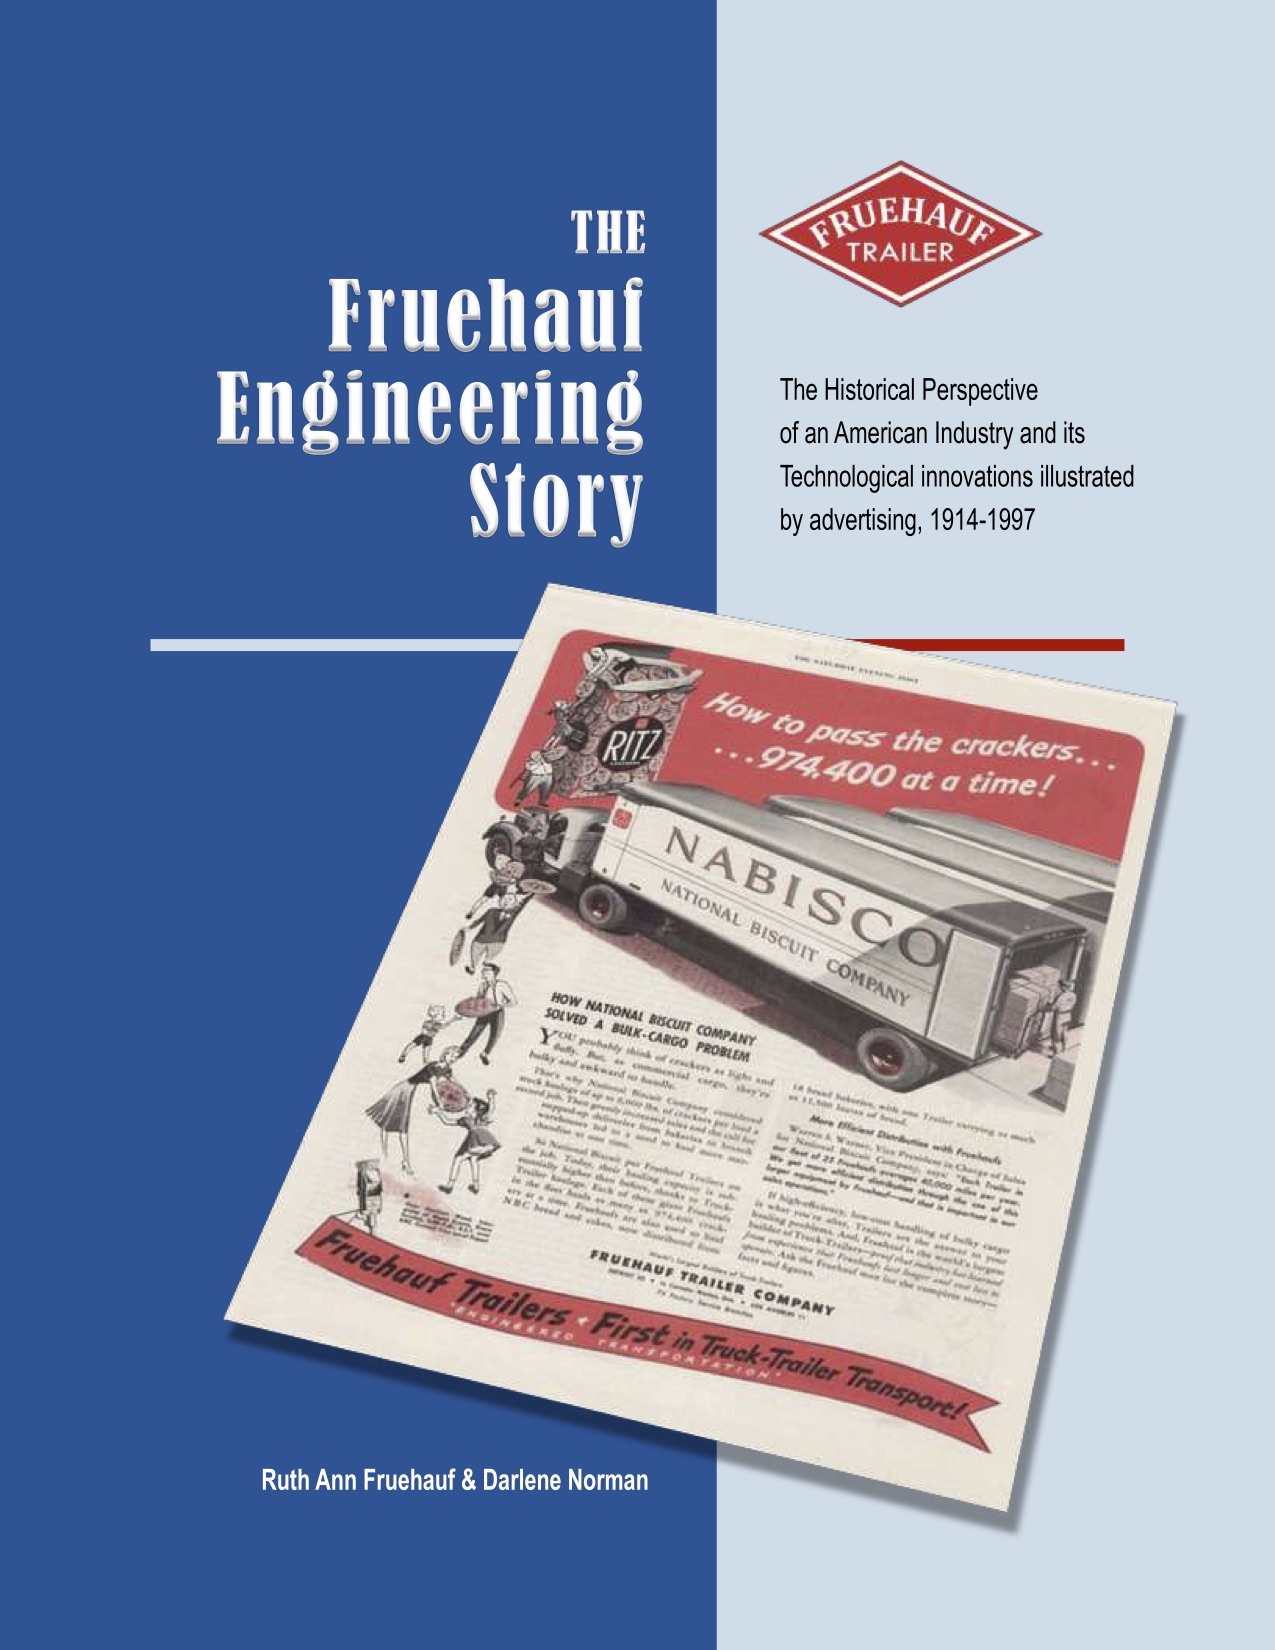 The Fruehauf Engineering Story, The historical perspective of an American industry and its technological innovations illustrated by advertising, 1914-1997   ISBN-13: 978-0578186870